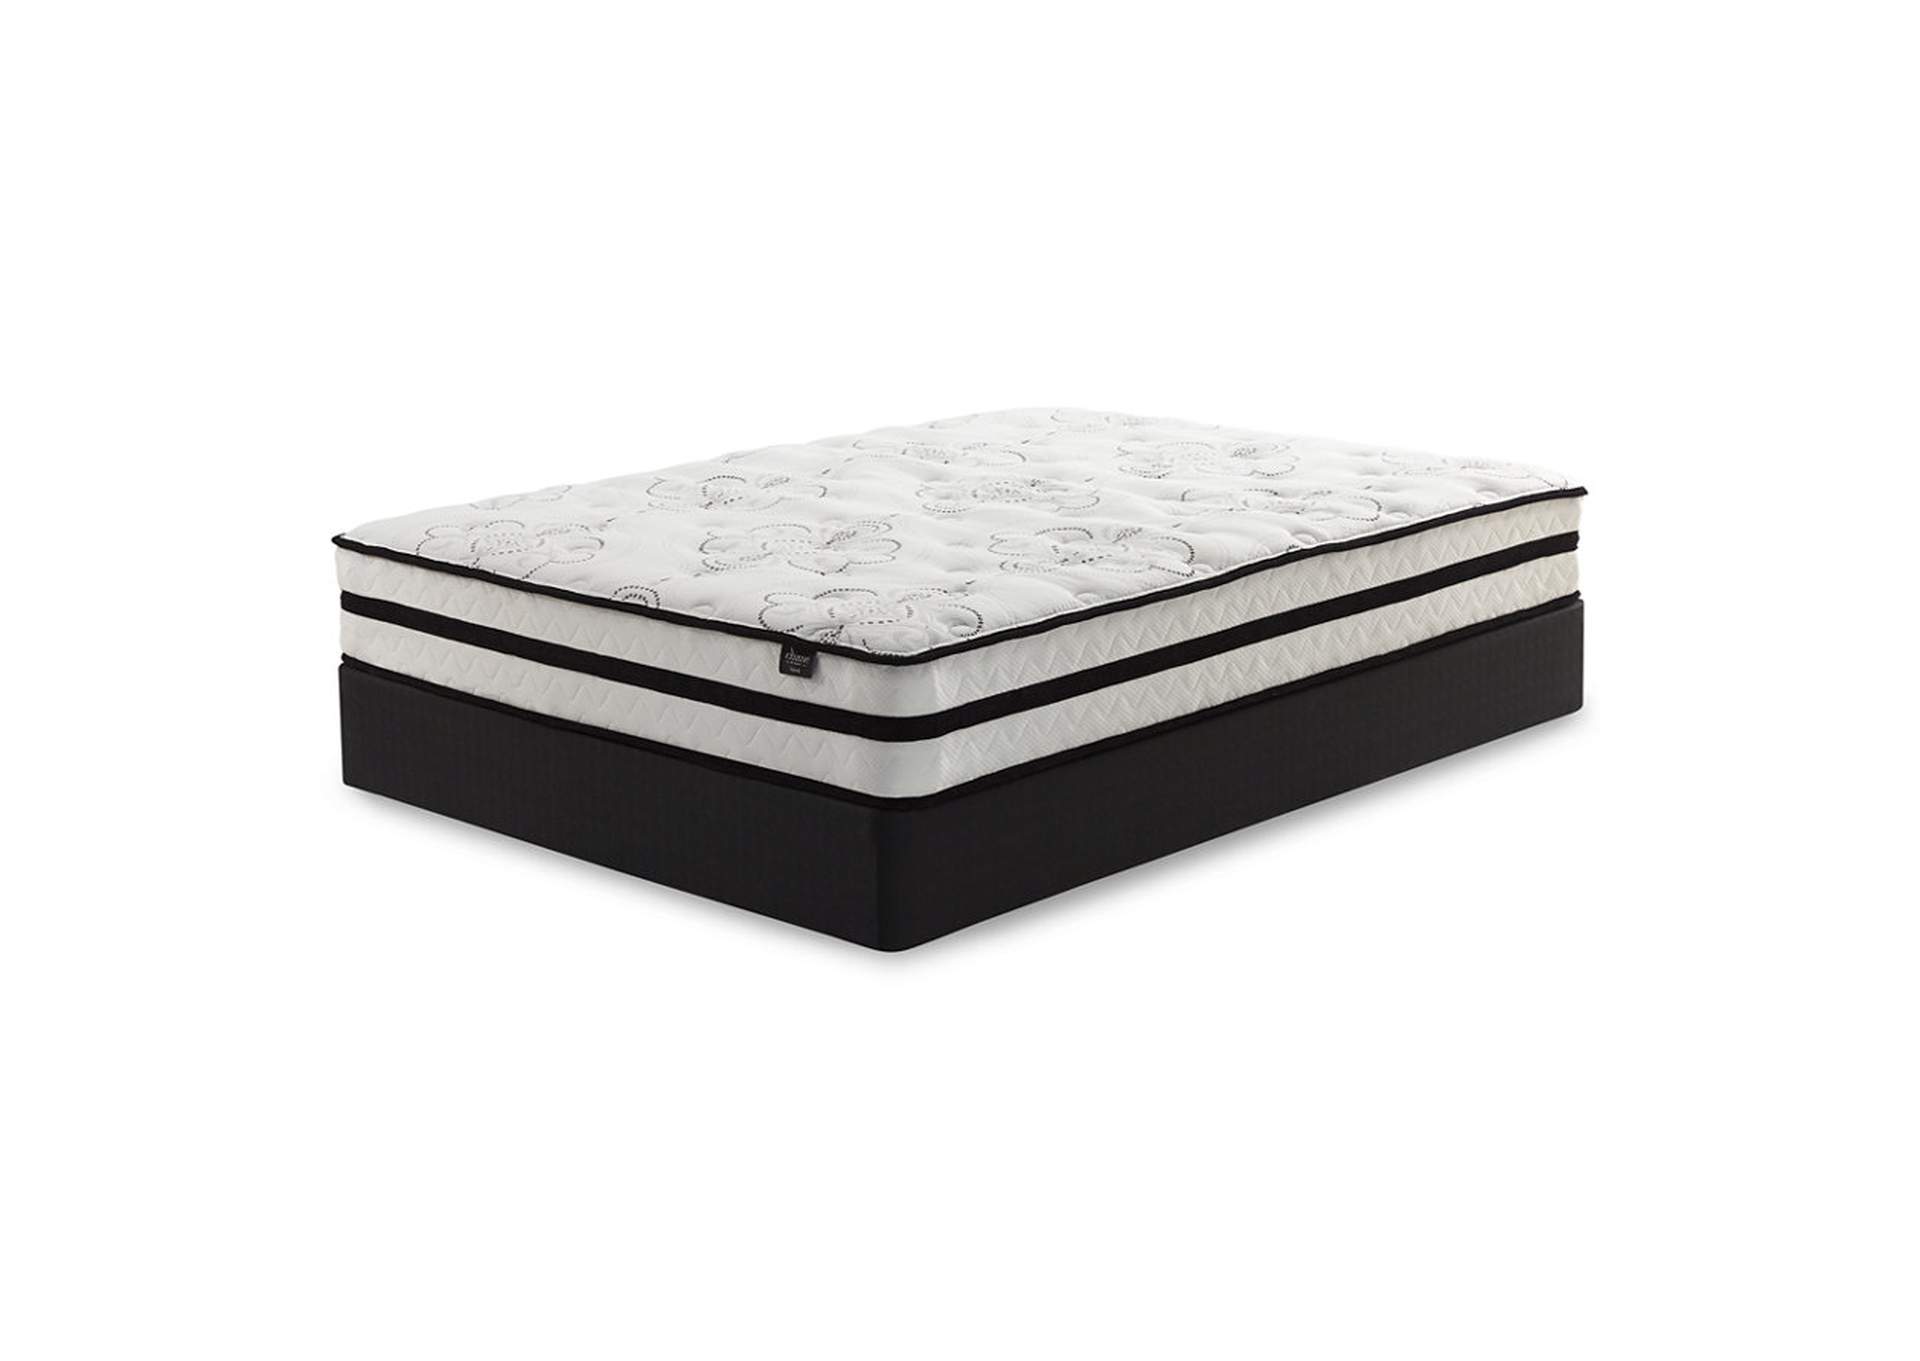 Chime 10 Inch Hybrid 10 Inch Queen Mattress and Pillow,Sierra Sleep by Ashley